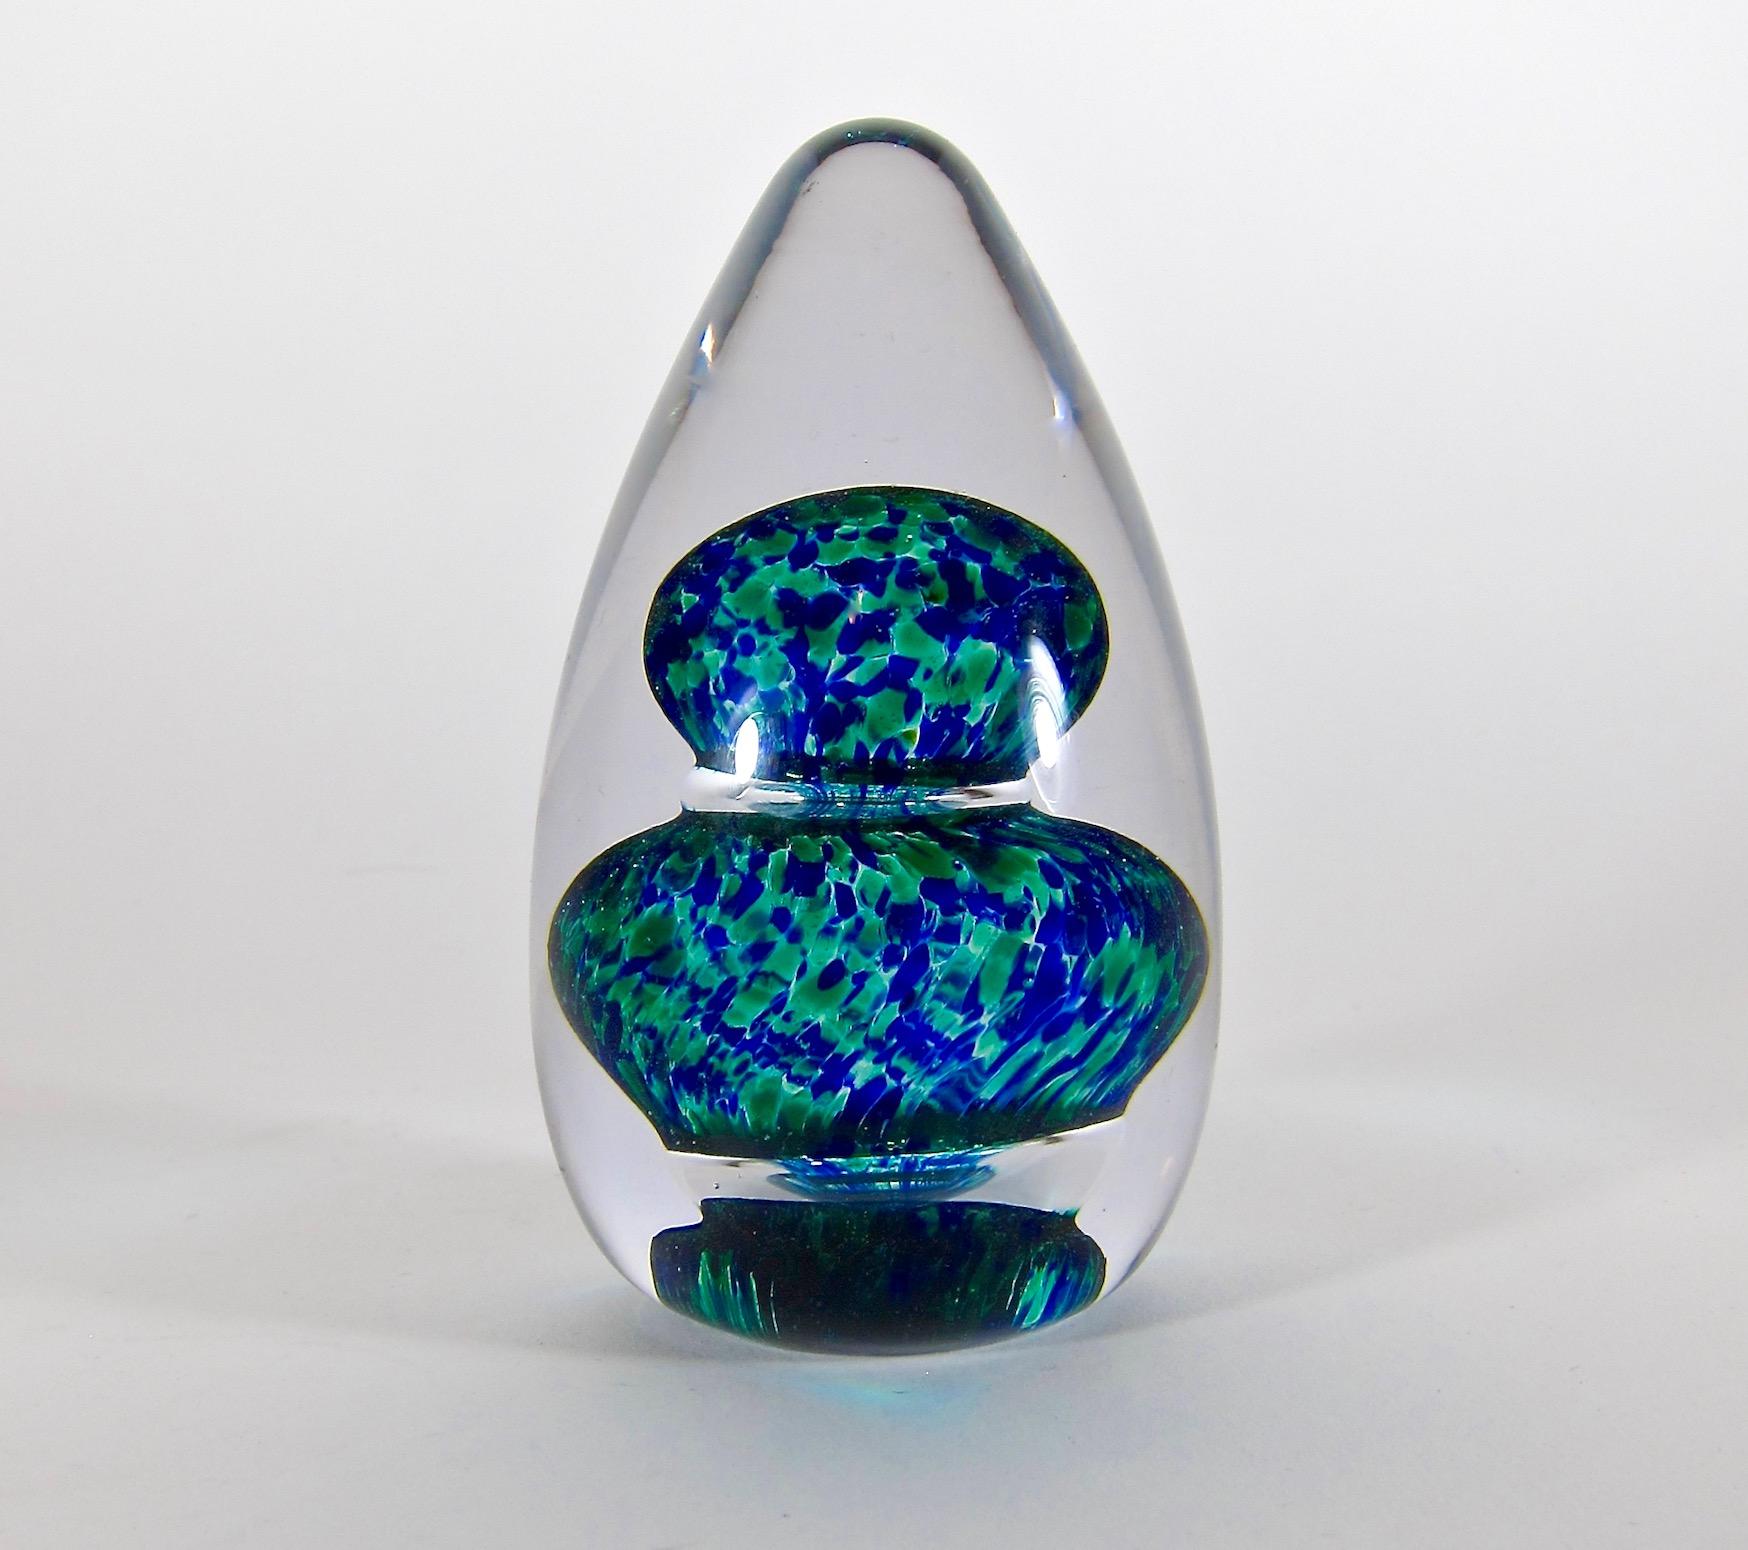 A vintage English paperweight handcrafted at Wedgwood Glass from clear, green and dark cobalt blue glass, circa 1974. The colorful egg or dome shaped, art glass weight was designed by Ronald Sennett-Willson in the late 1960s. Stennett-Willson was